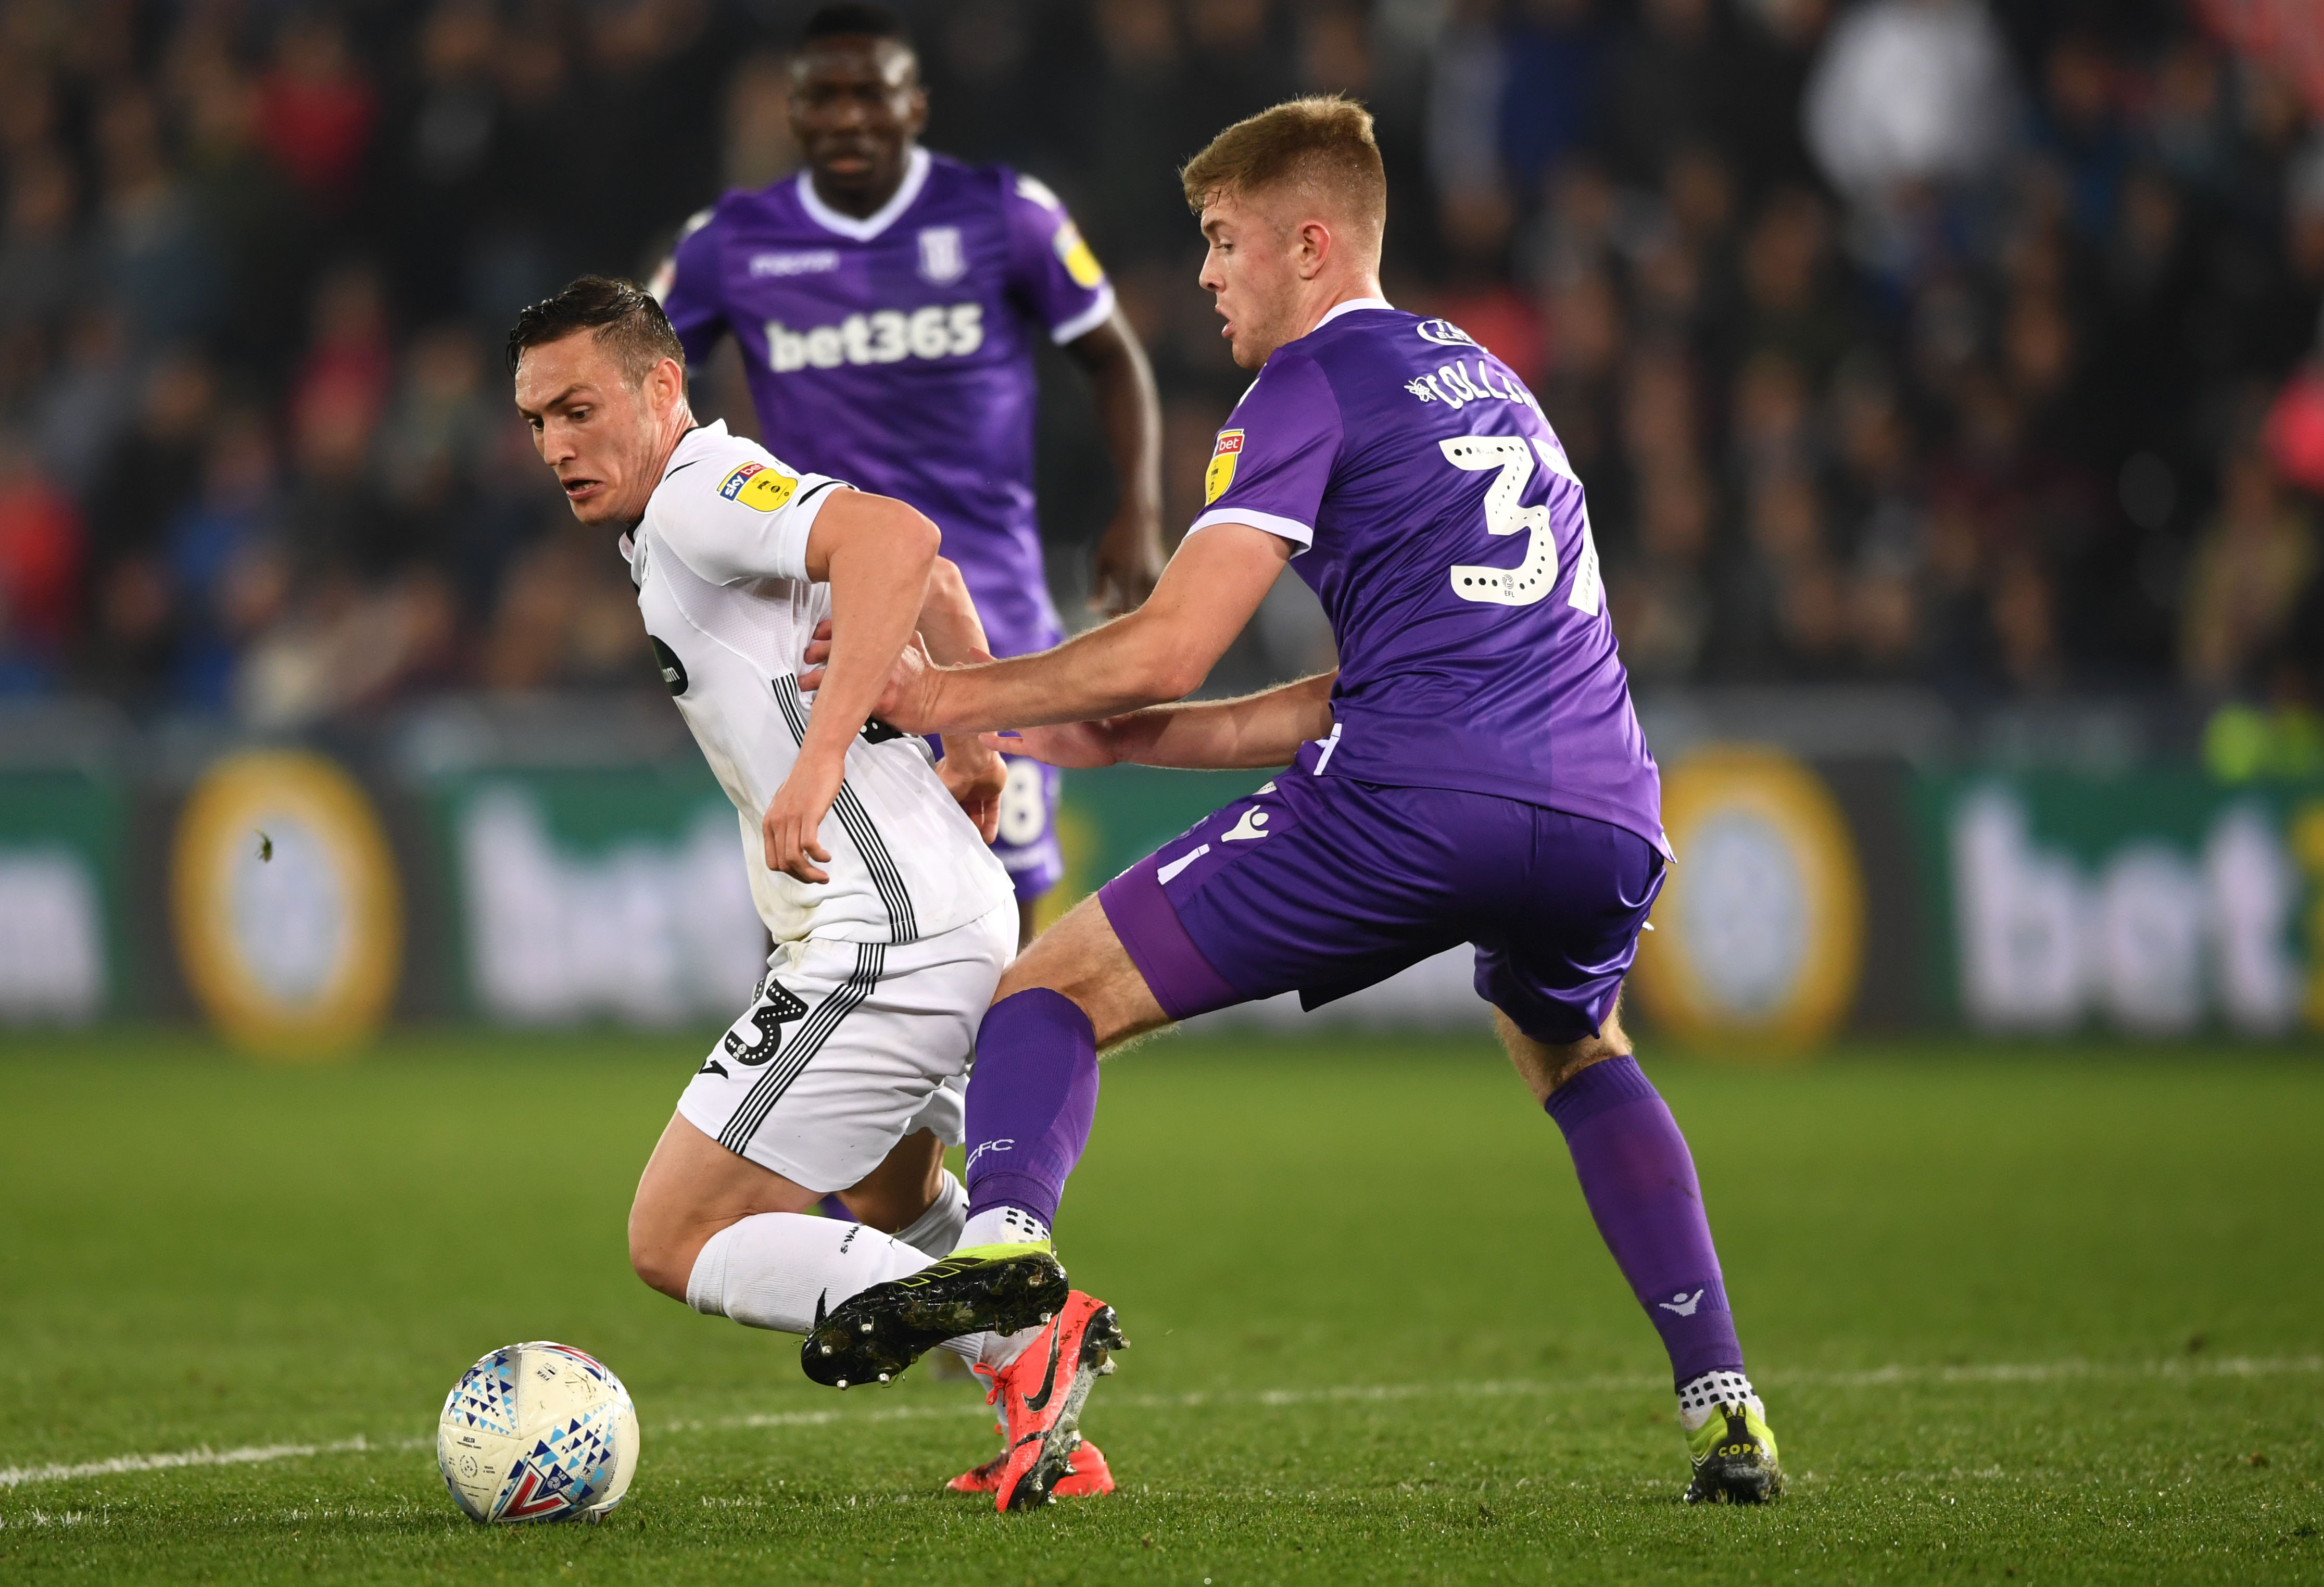 SWANSEA, WALES - APRIL 09: Swansea player Connor Roberts is challenged by Nathan Collins during the Sky Bet Championship match between Swansea City and Stoke City at Liberty Stadium on April 09, 2019 in Swansea, Wales. (Photo by Stu Forster/Getty Images)